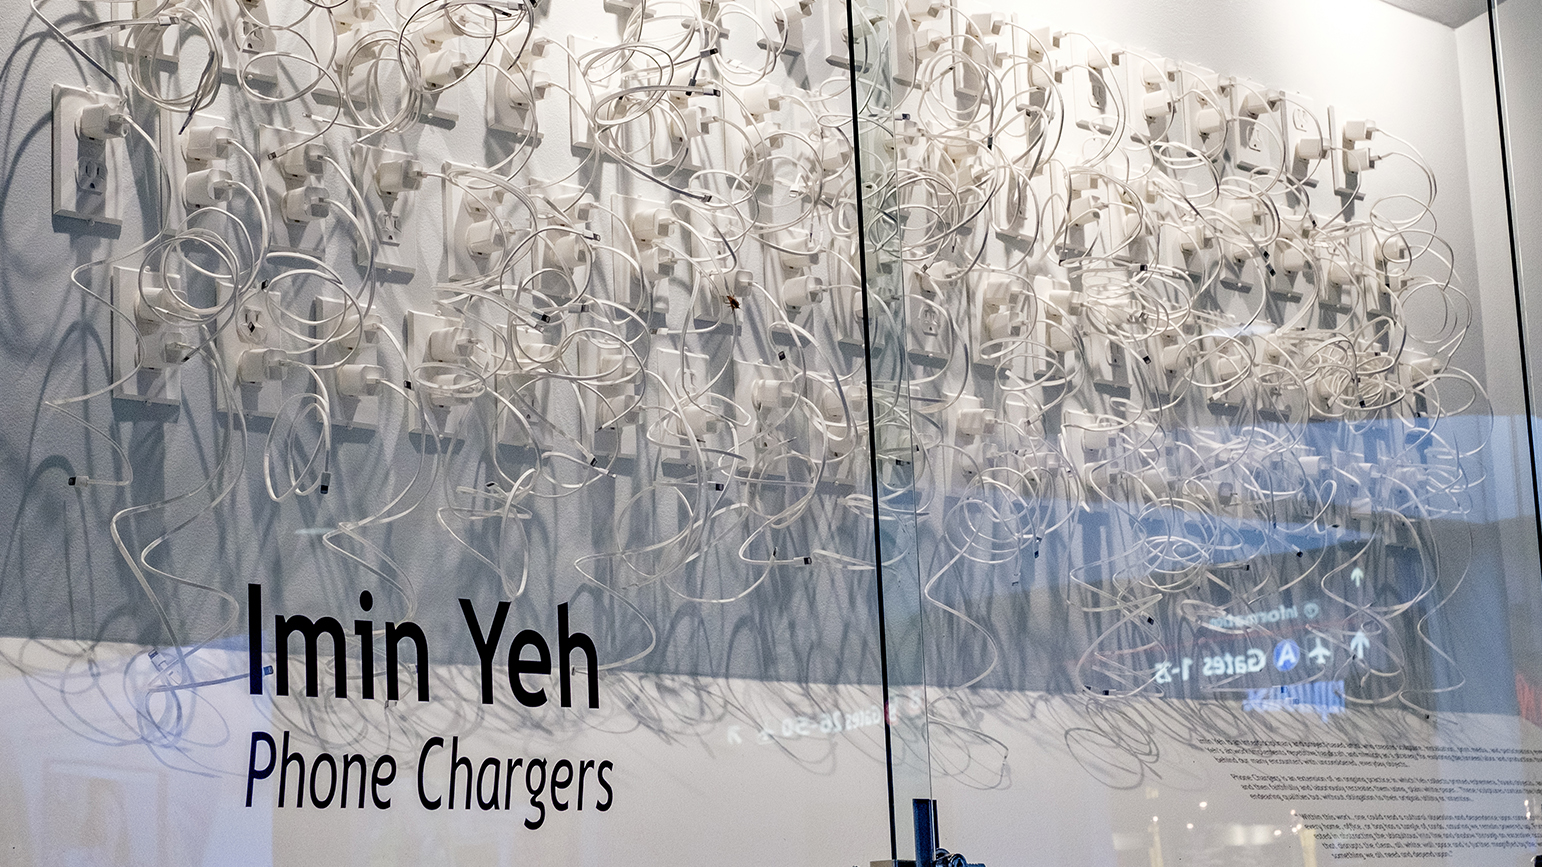 Photograph of an installation of hundreds iPhone chargers constructed from paper plugged into paper outlets